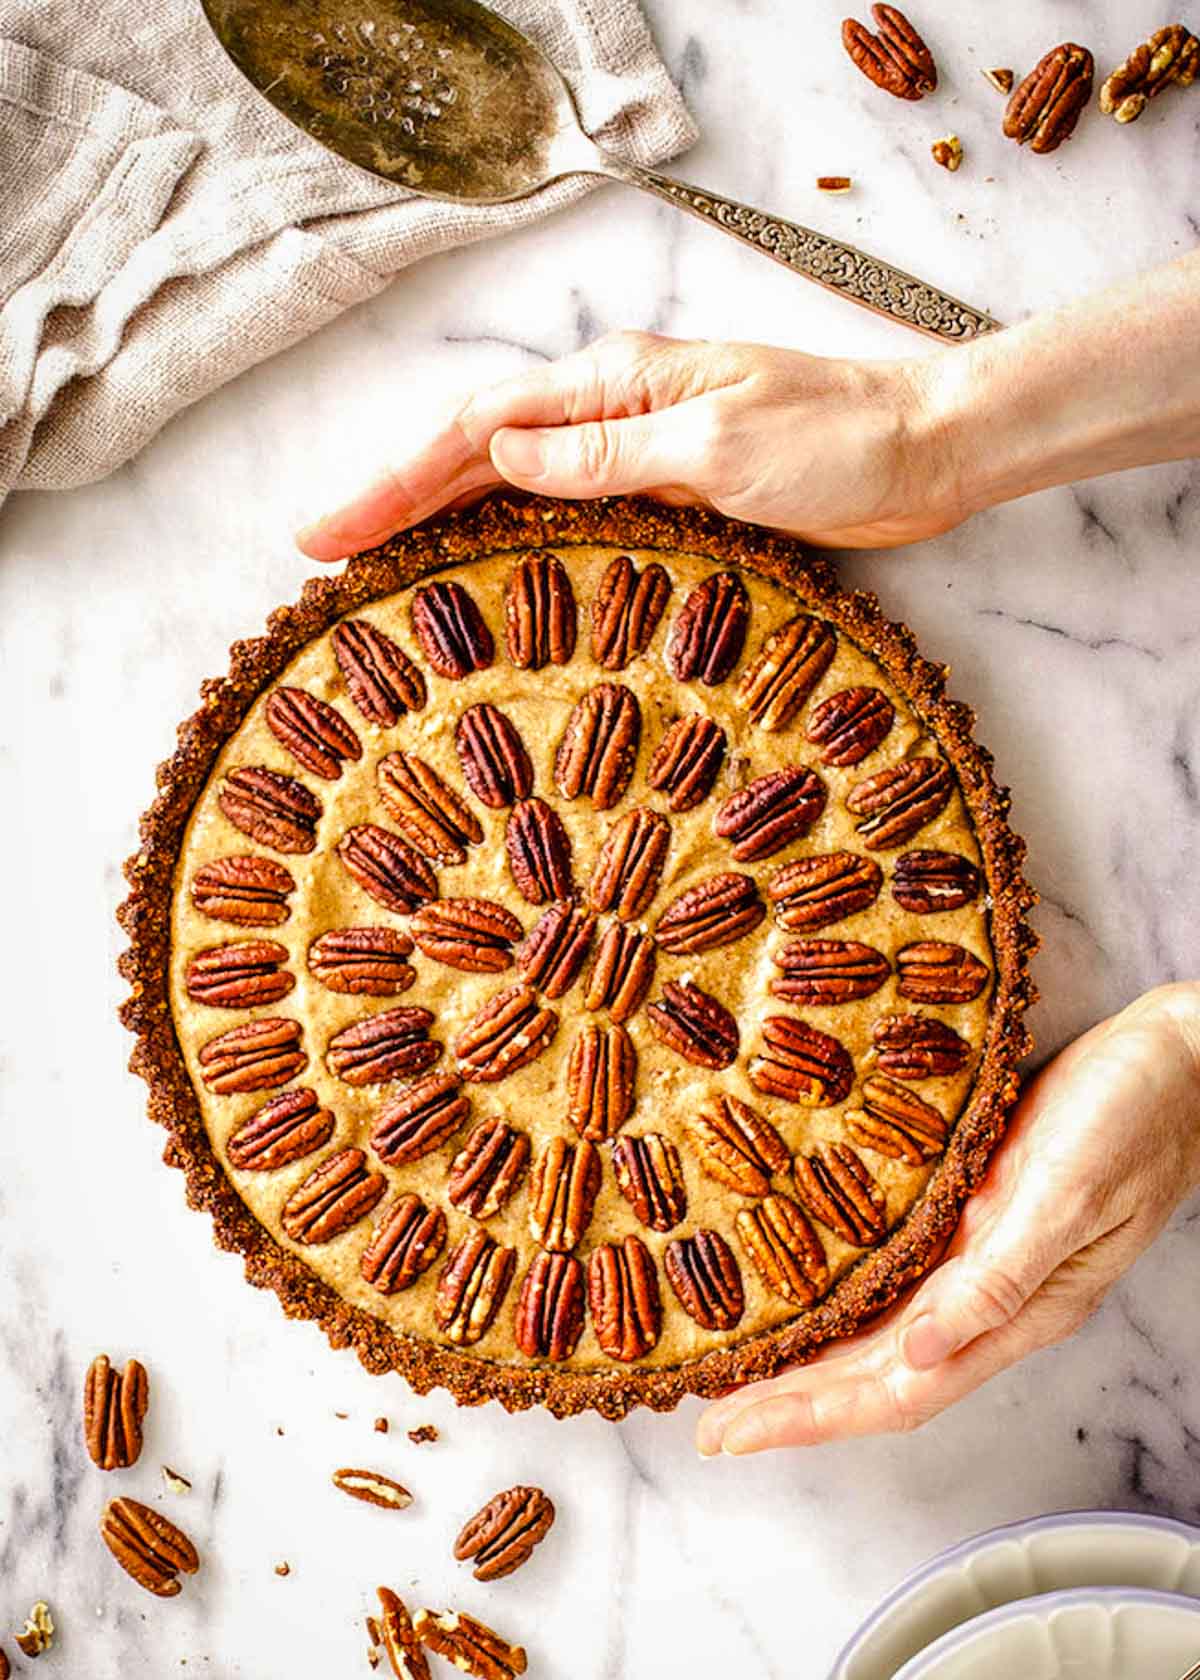 A woman's hands hold a vegan pecan pie decorated with concentric circles of pecans. A silver cake slicer, napkin and places are nearby.